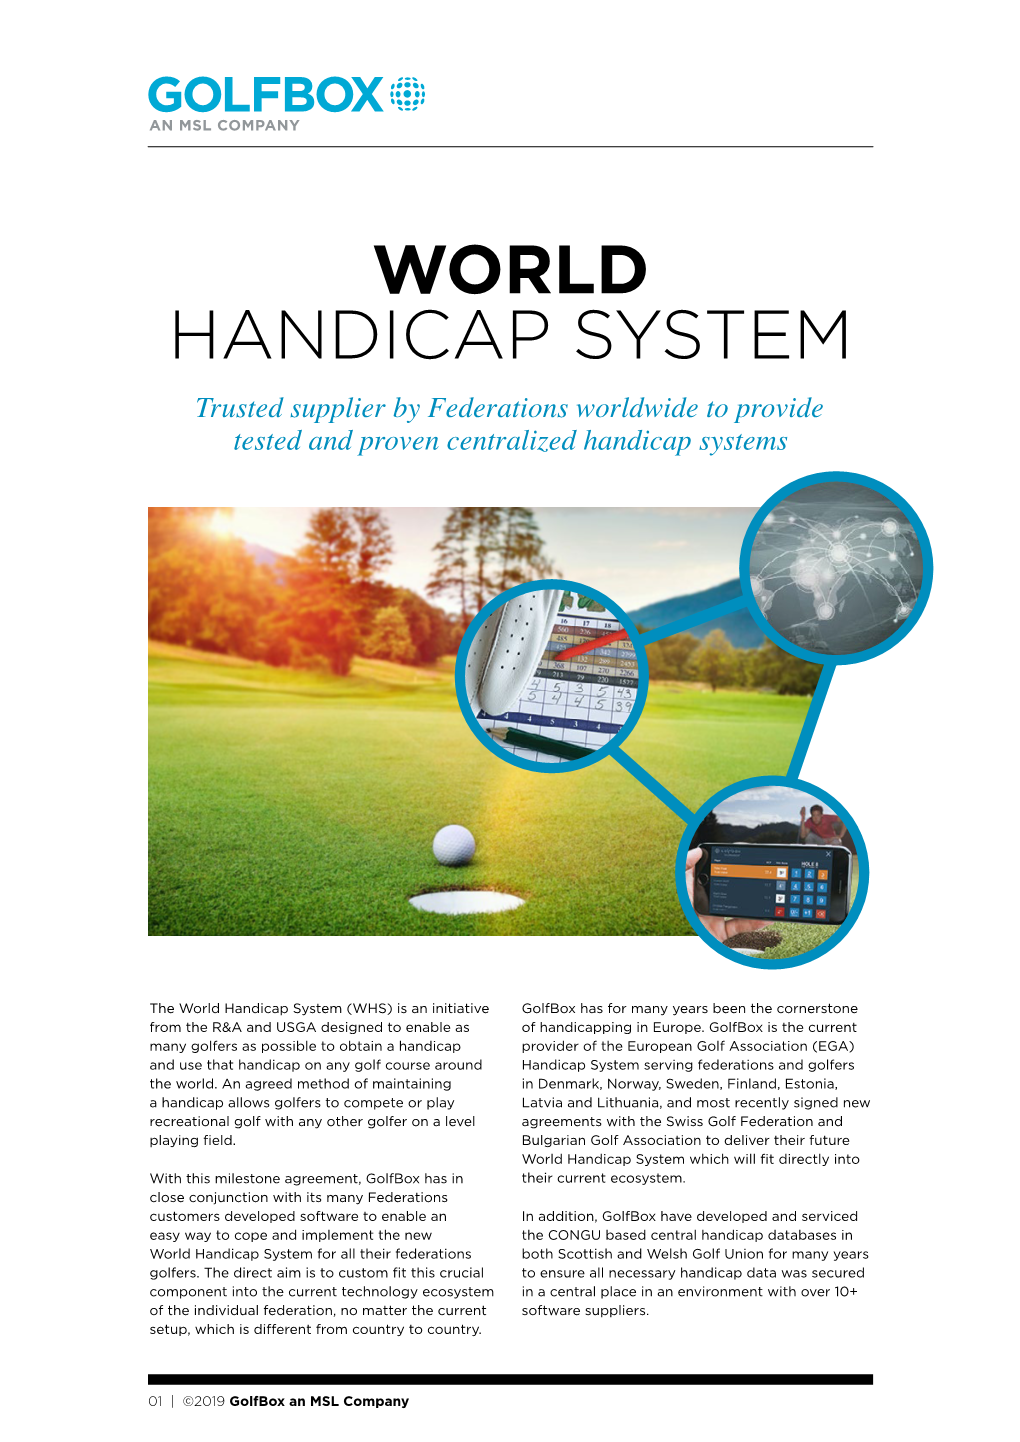 WORLD HANDICAP SYSTEM Trusted Supplier by Federations Worldwide to Provide Tested and Proven Centralized Handicap Systems